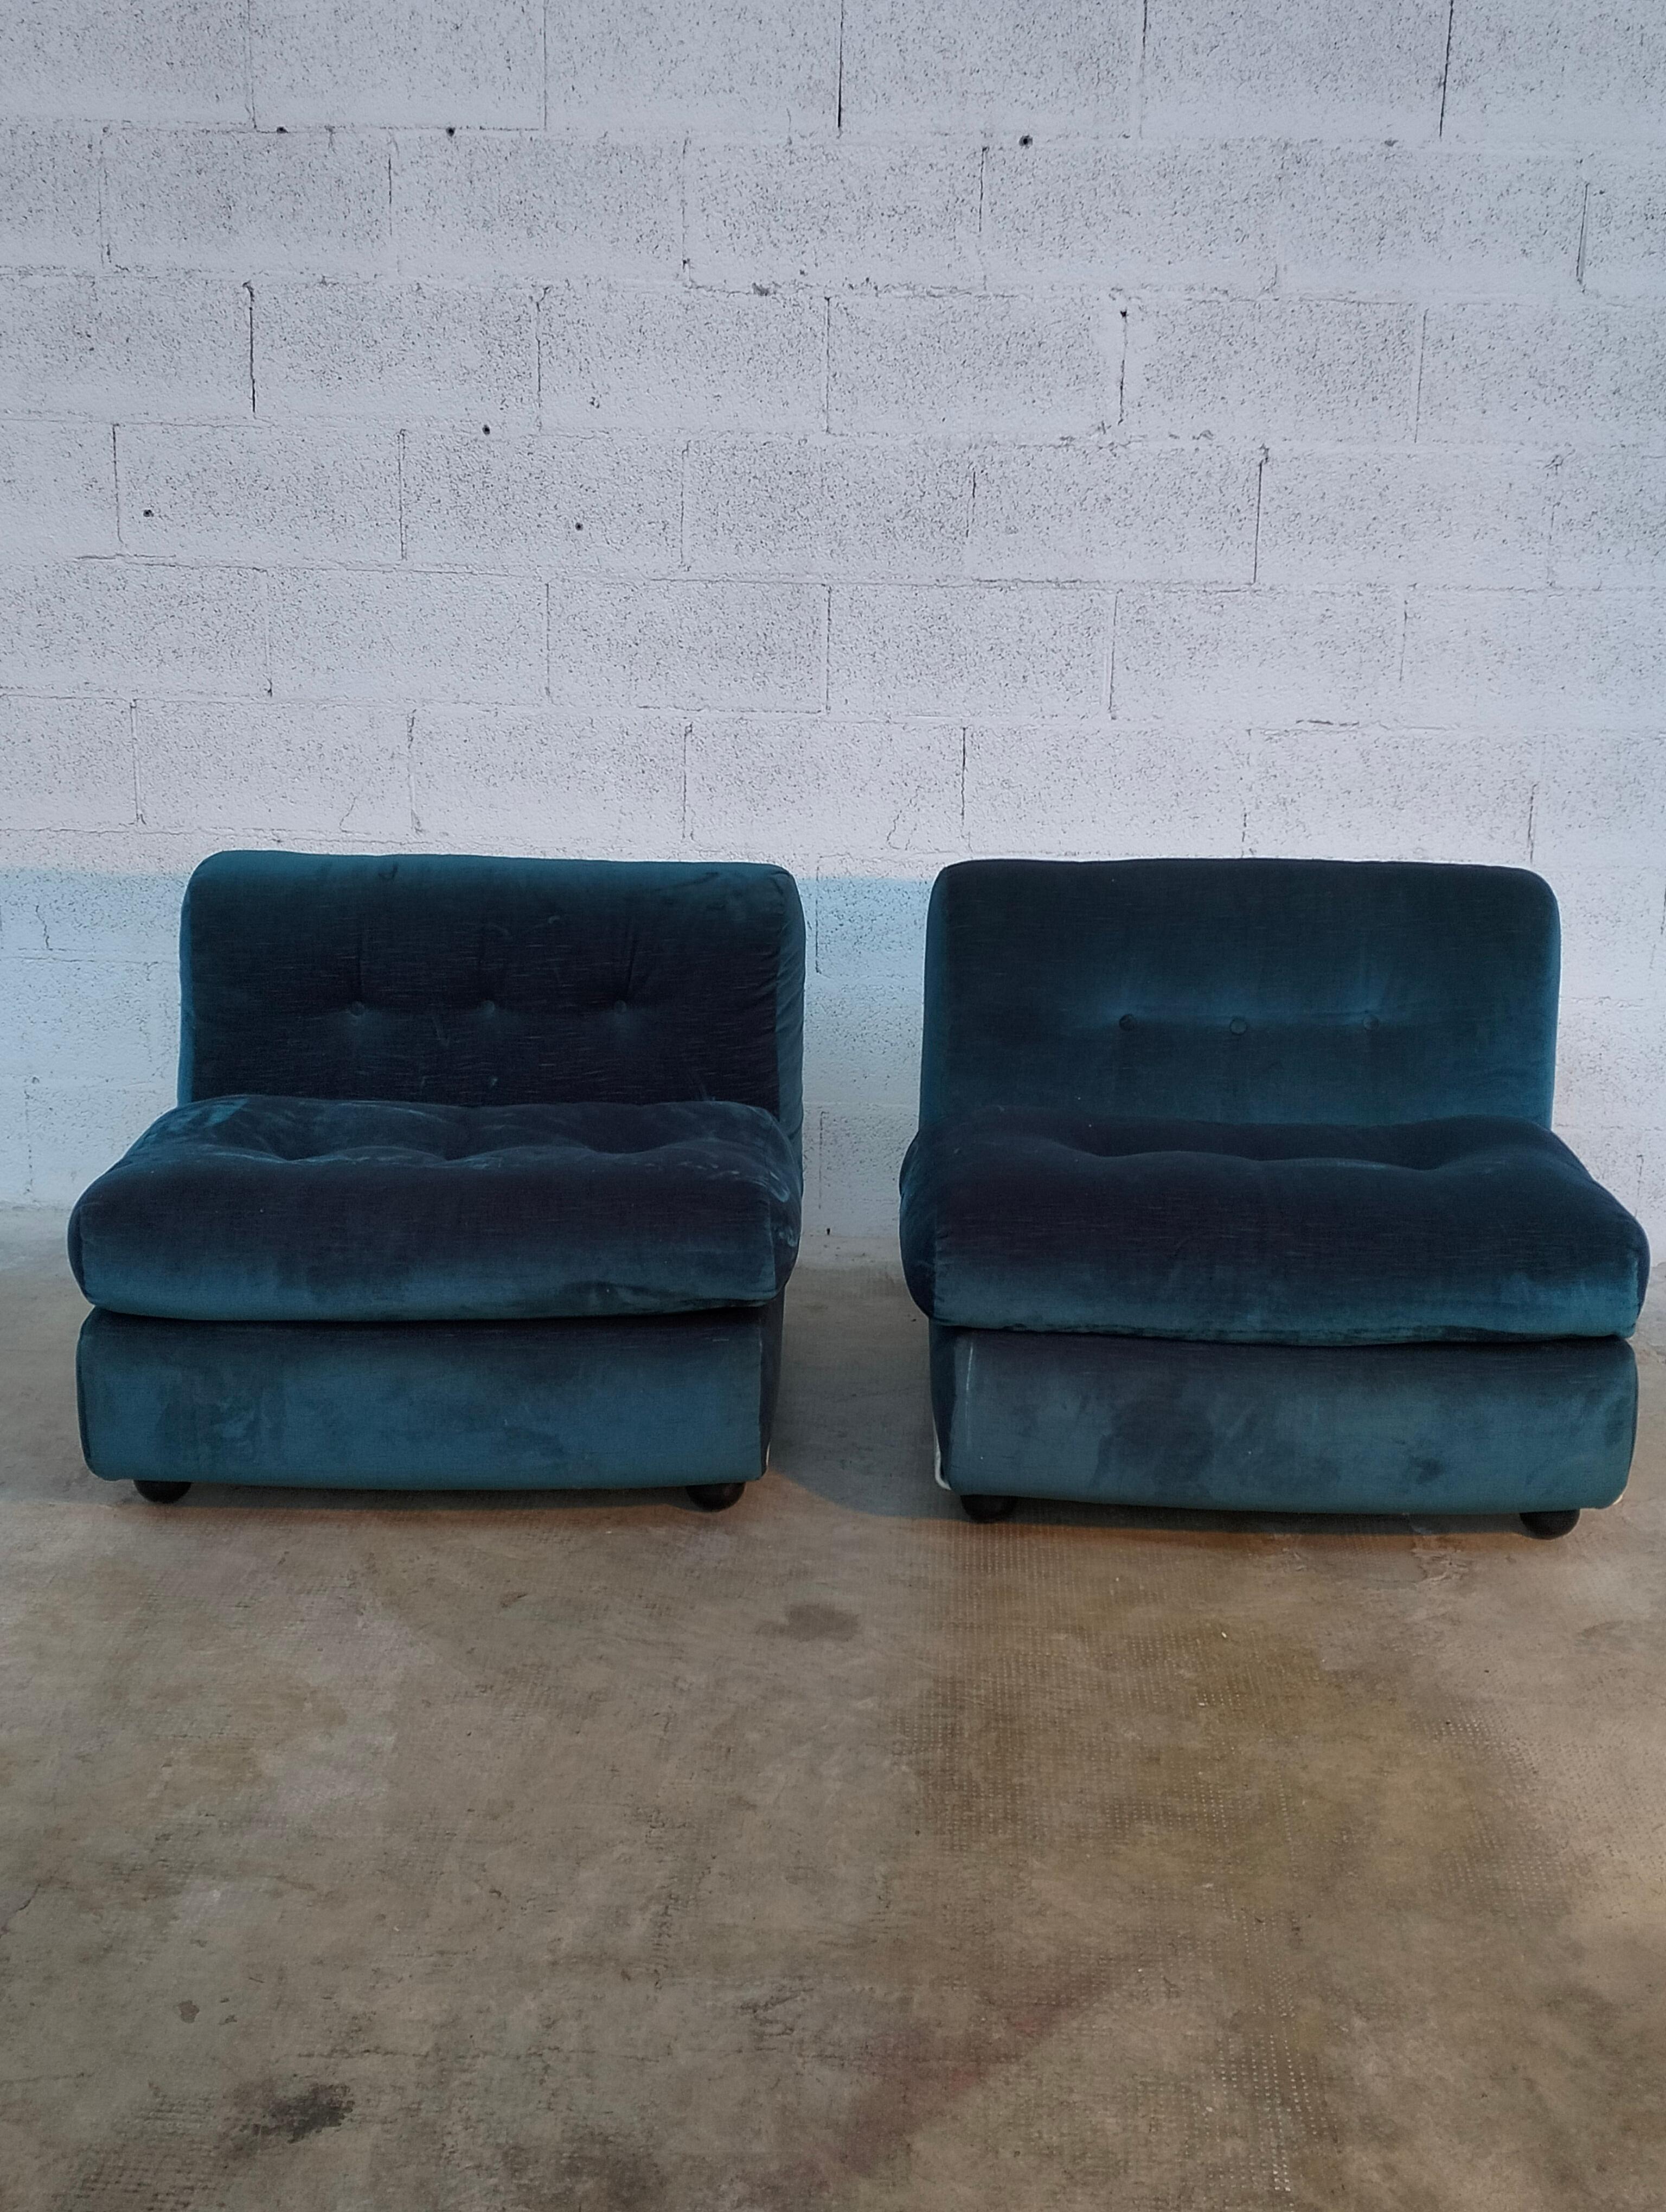 Set of 2 Blue Amanta Lounge Chairs by Mario Bellini for C&B Italia, 1970s For Sale 5